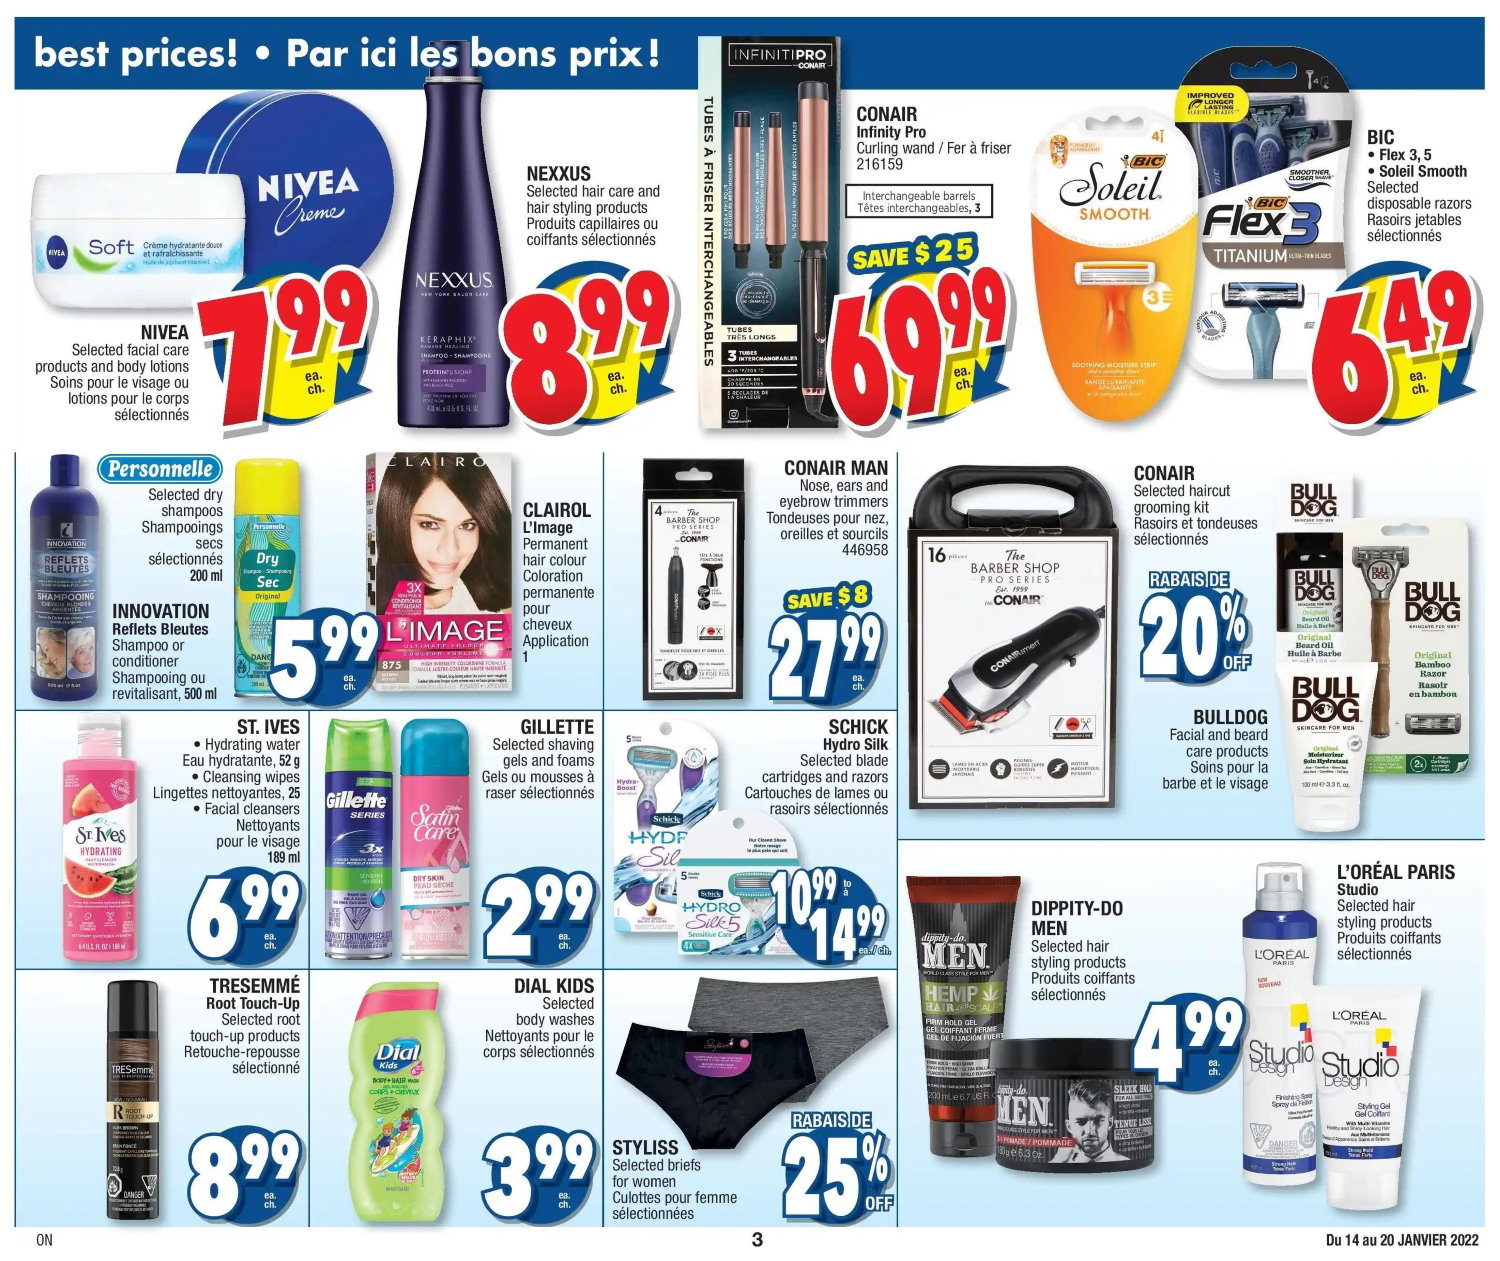 Jean Coutu - Even More Savings - Weekly Flyer Specials - Page 3